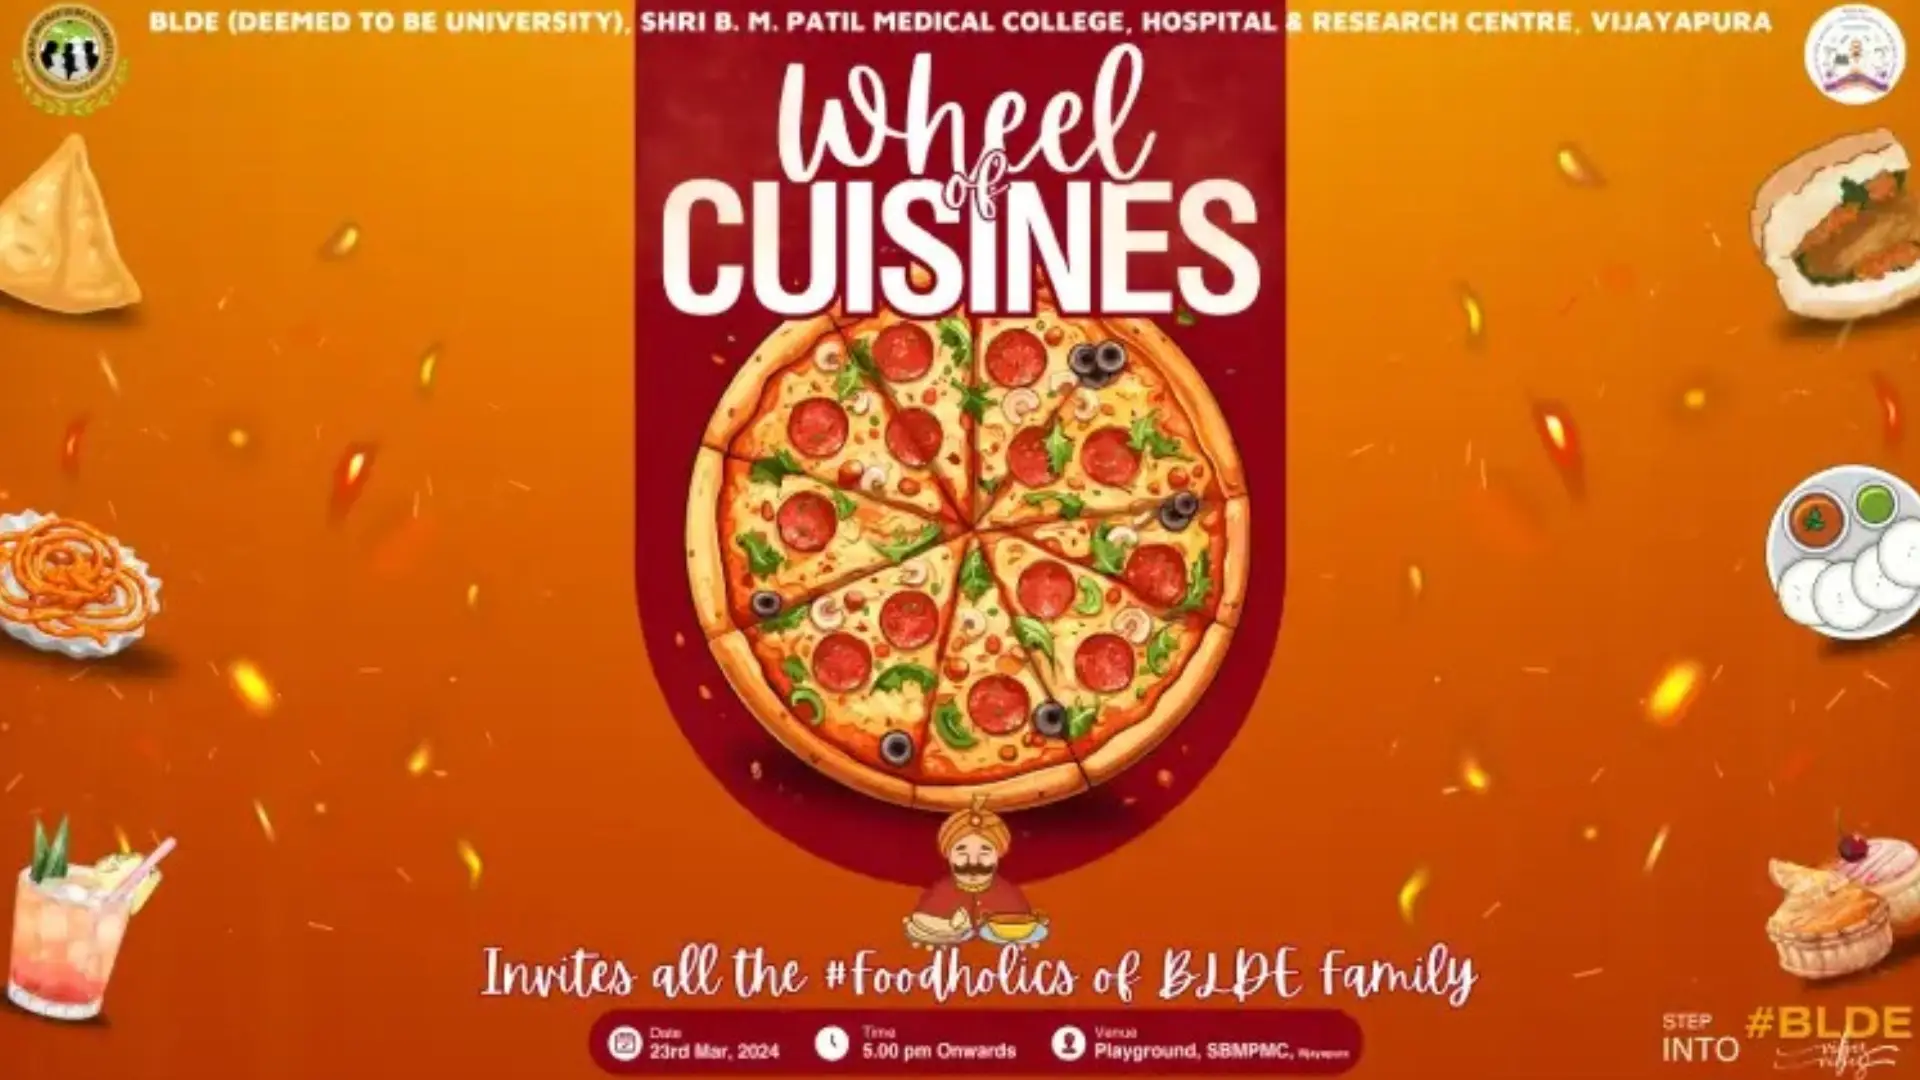 WheelofCuisines & Fun Games, held on March 23rd, 2024, at the Playground, Shri B. M. Patil Medical College, Hospital, and Research Centre.